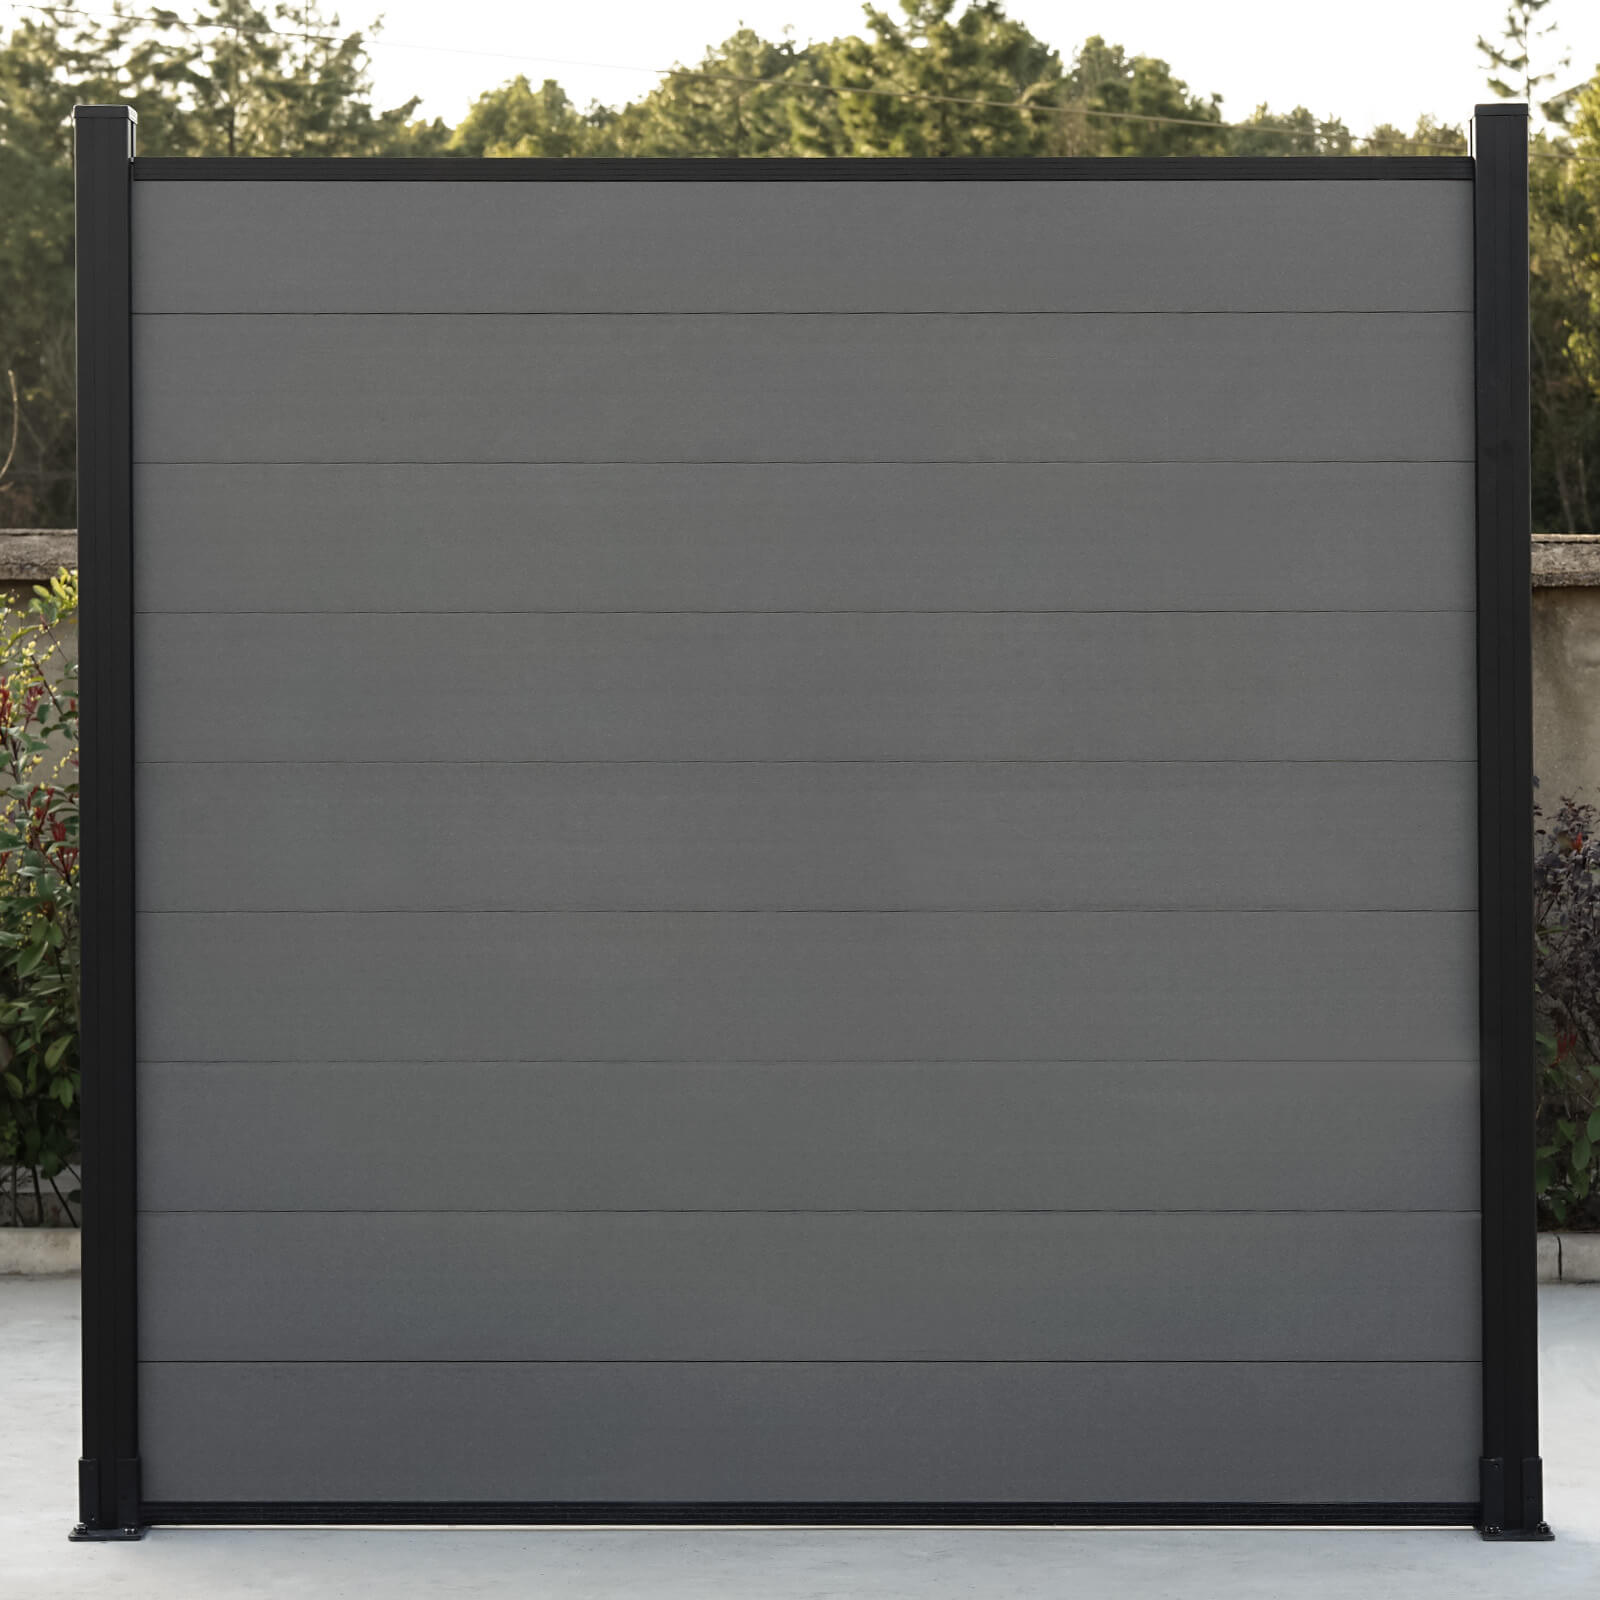 DIY 6 ft. H x 6 ft. W x 0.8 in horizontal privacy composite fence panel for outdoor AM10131